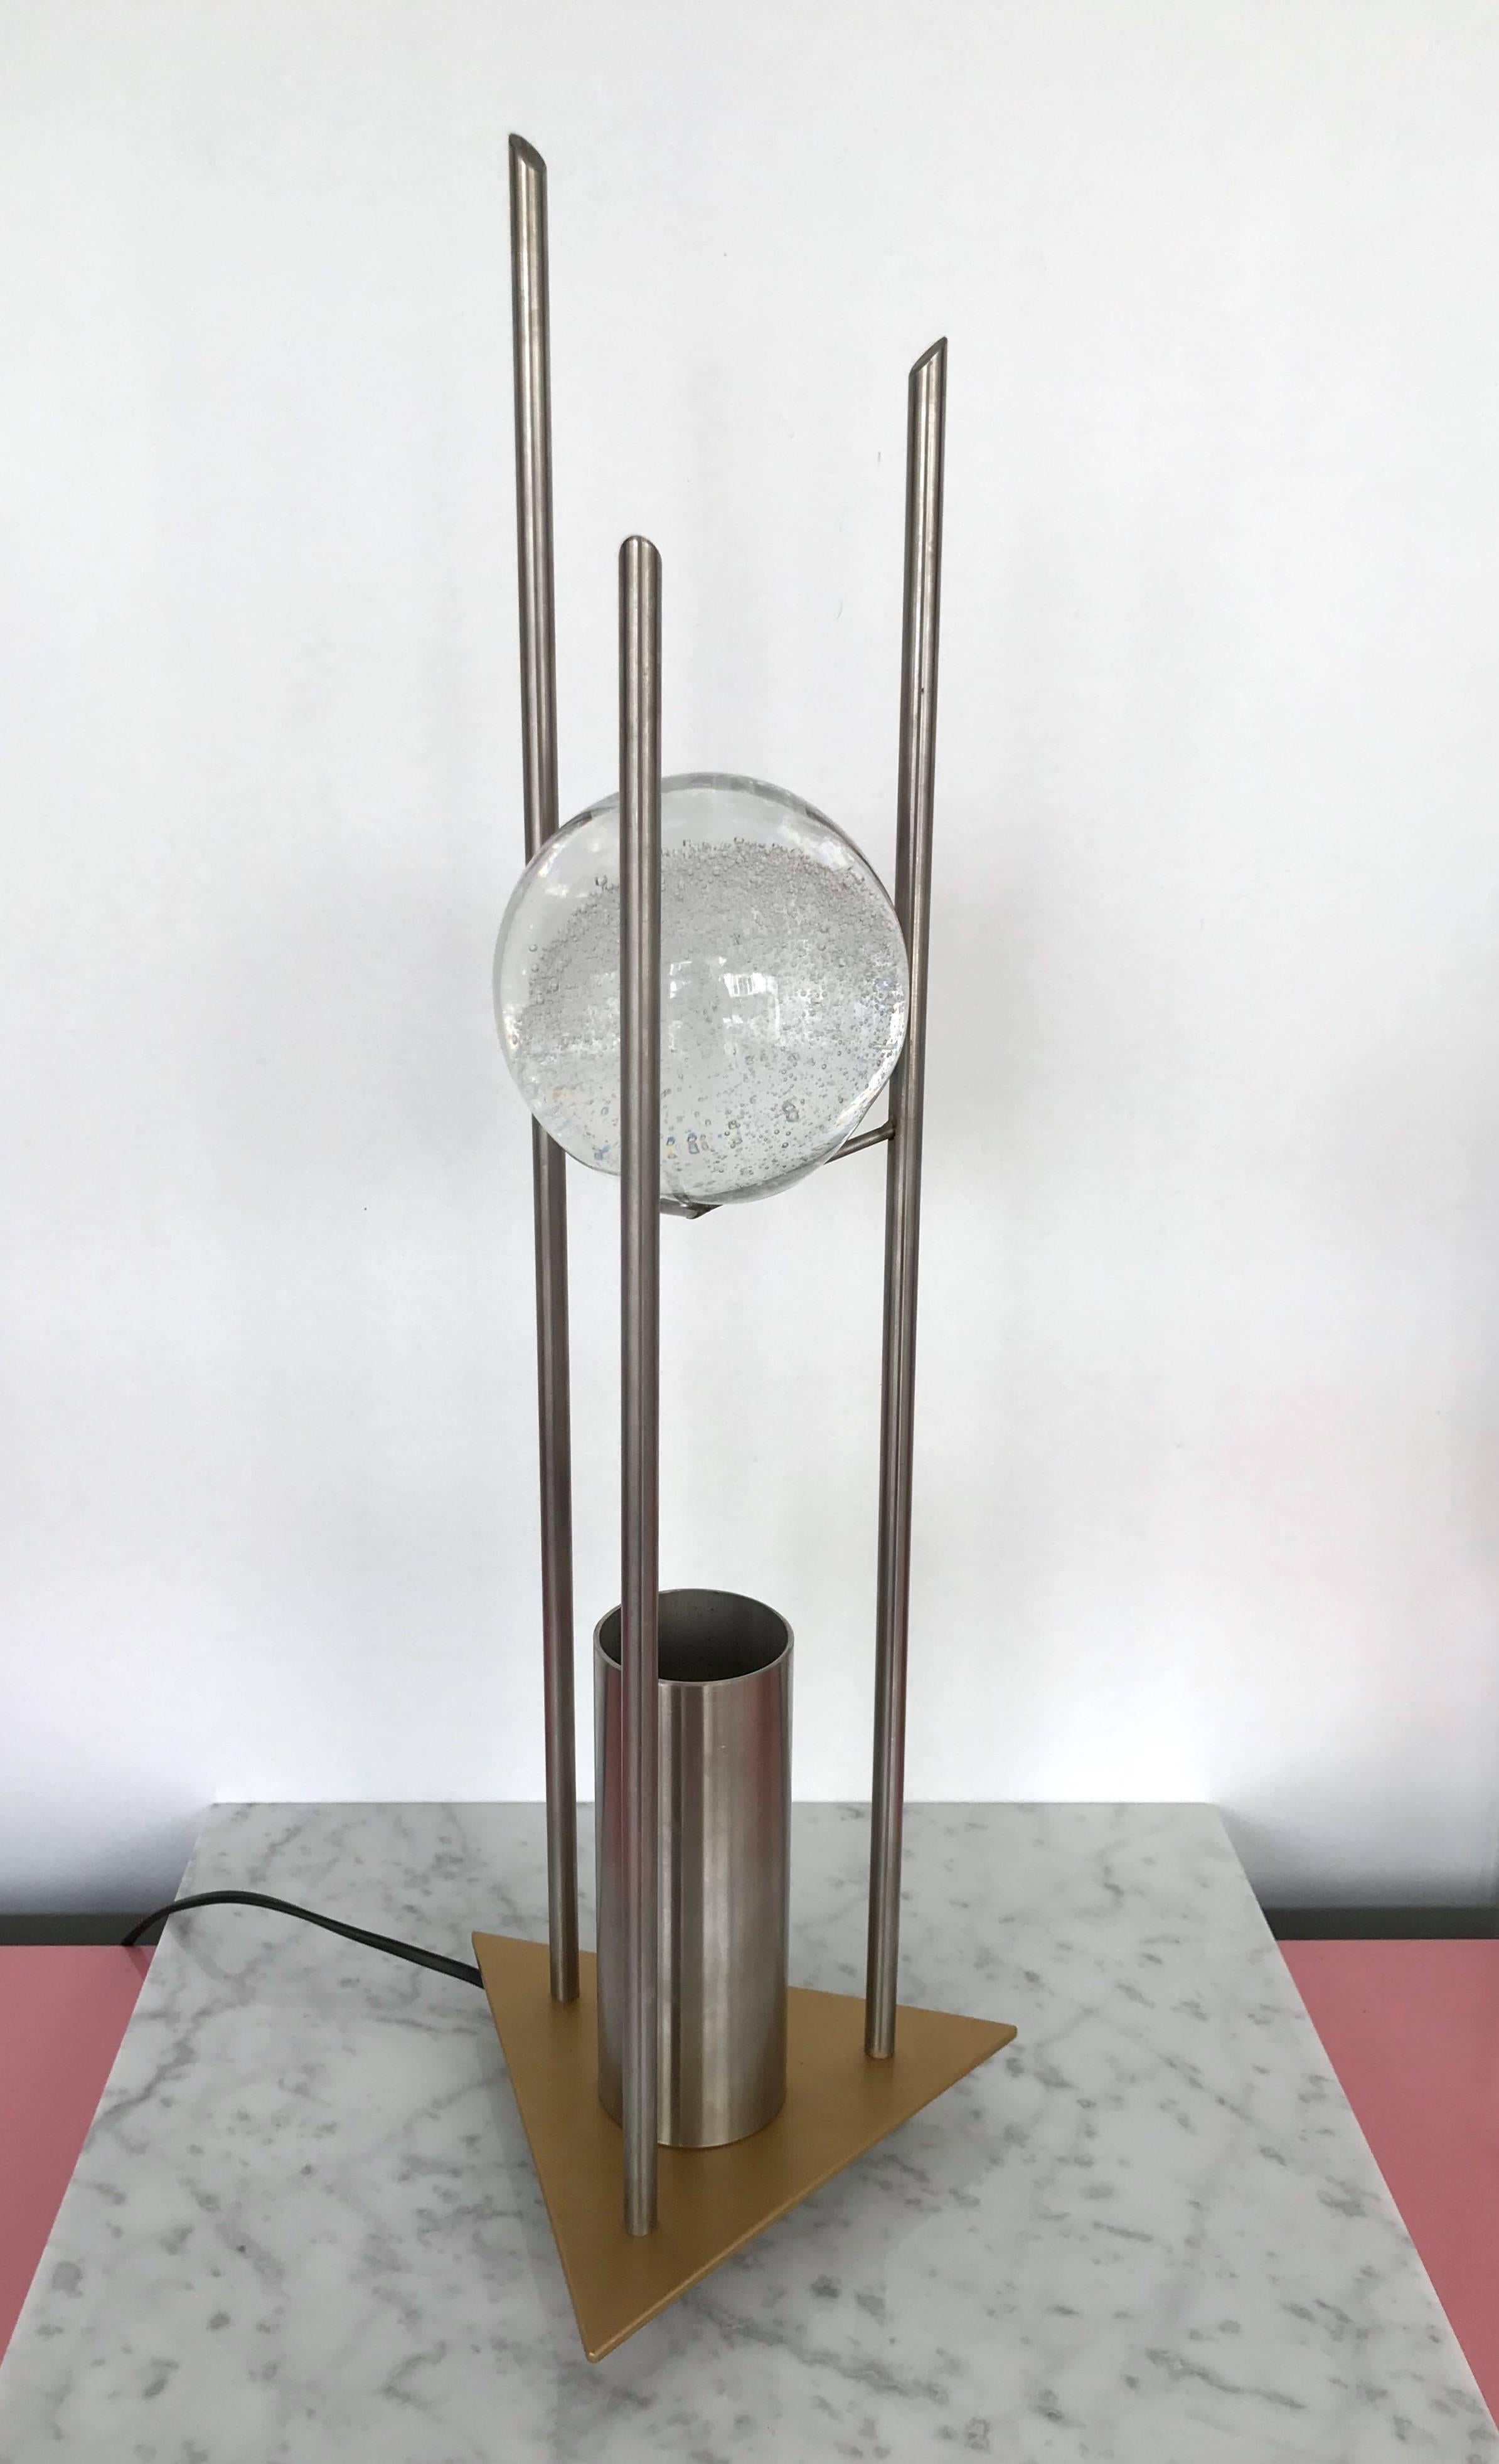 Pair of sculptural table lamps full blown bubble glass ball, stainless steel structure, gilt gold metal lacquered base. Light is diffused by the glass sphere. Sign monogram on the base RW Manufaktur, Original new old stock from the 1980s, small